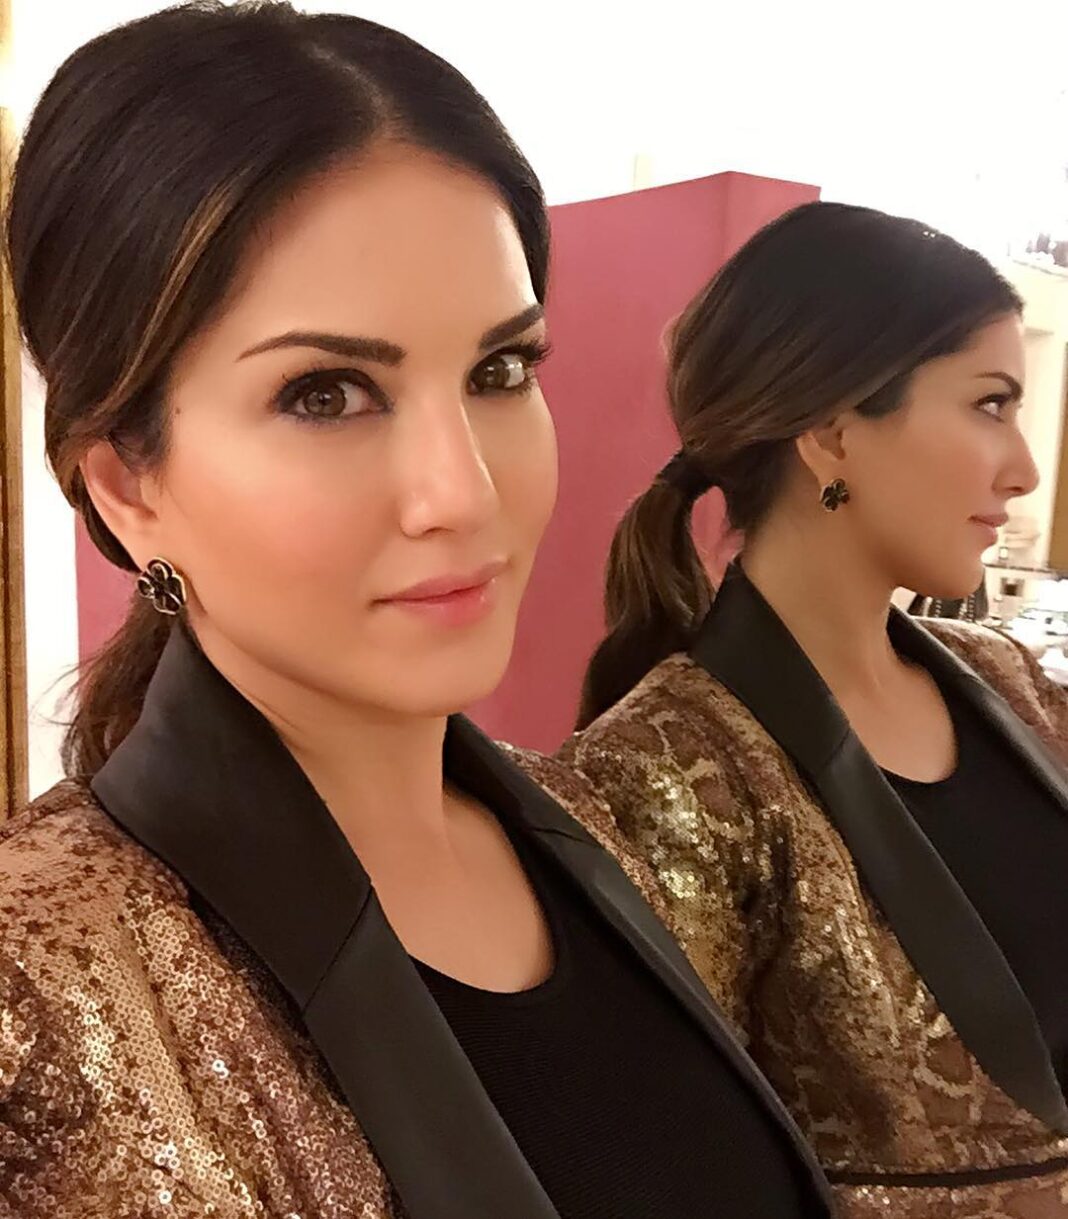 Sunny Leone Instagram - Love my hair and make up tonight! Thanks @nitashawahi and @tomasmoucka glam squad on point!! And this is their 5min hair and make up!! Haha